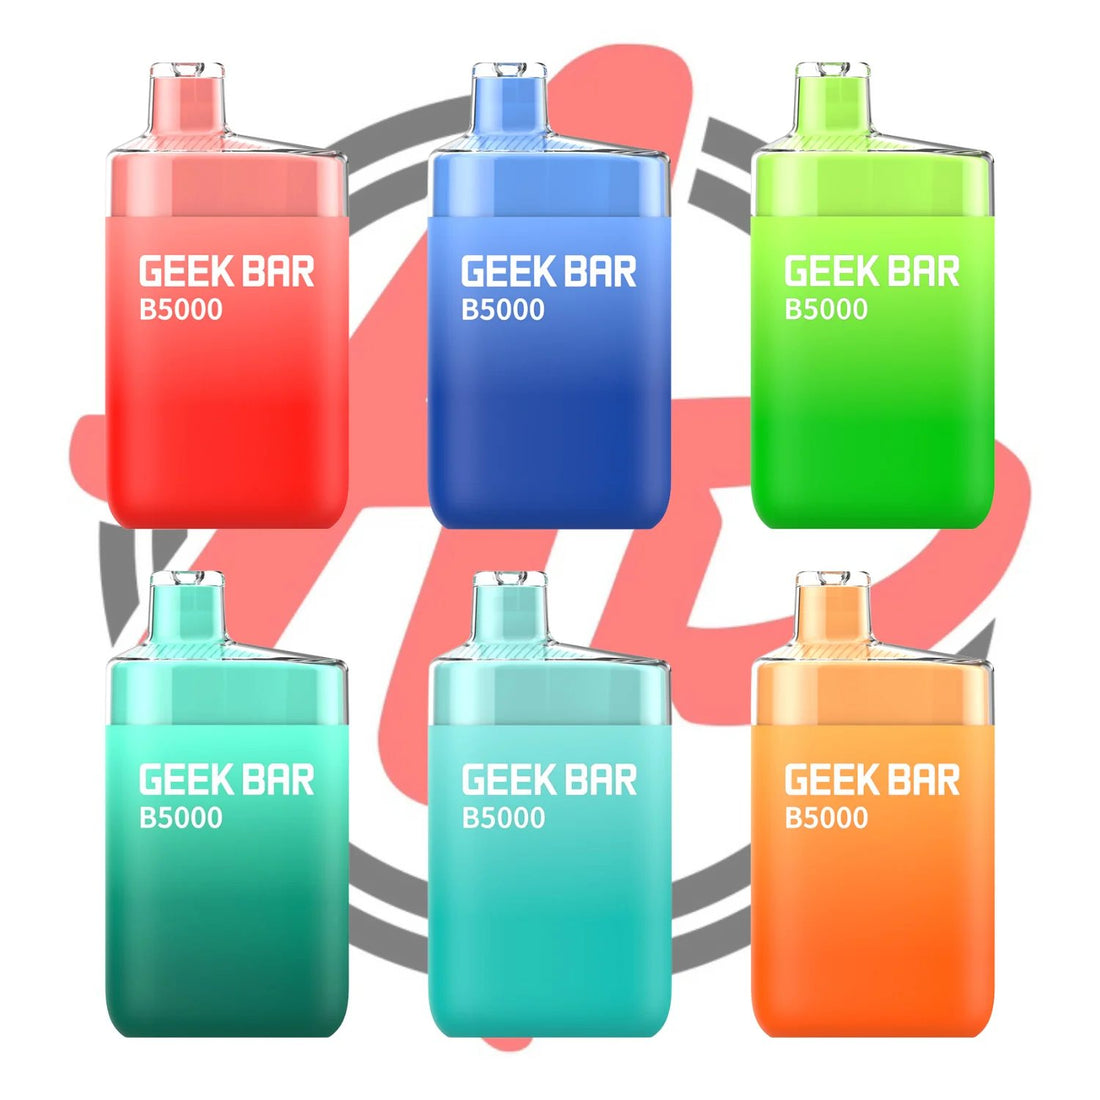 Geek Bar B5000 Disposable Vape - Review and Guide